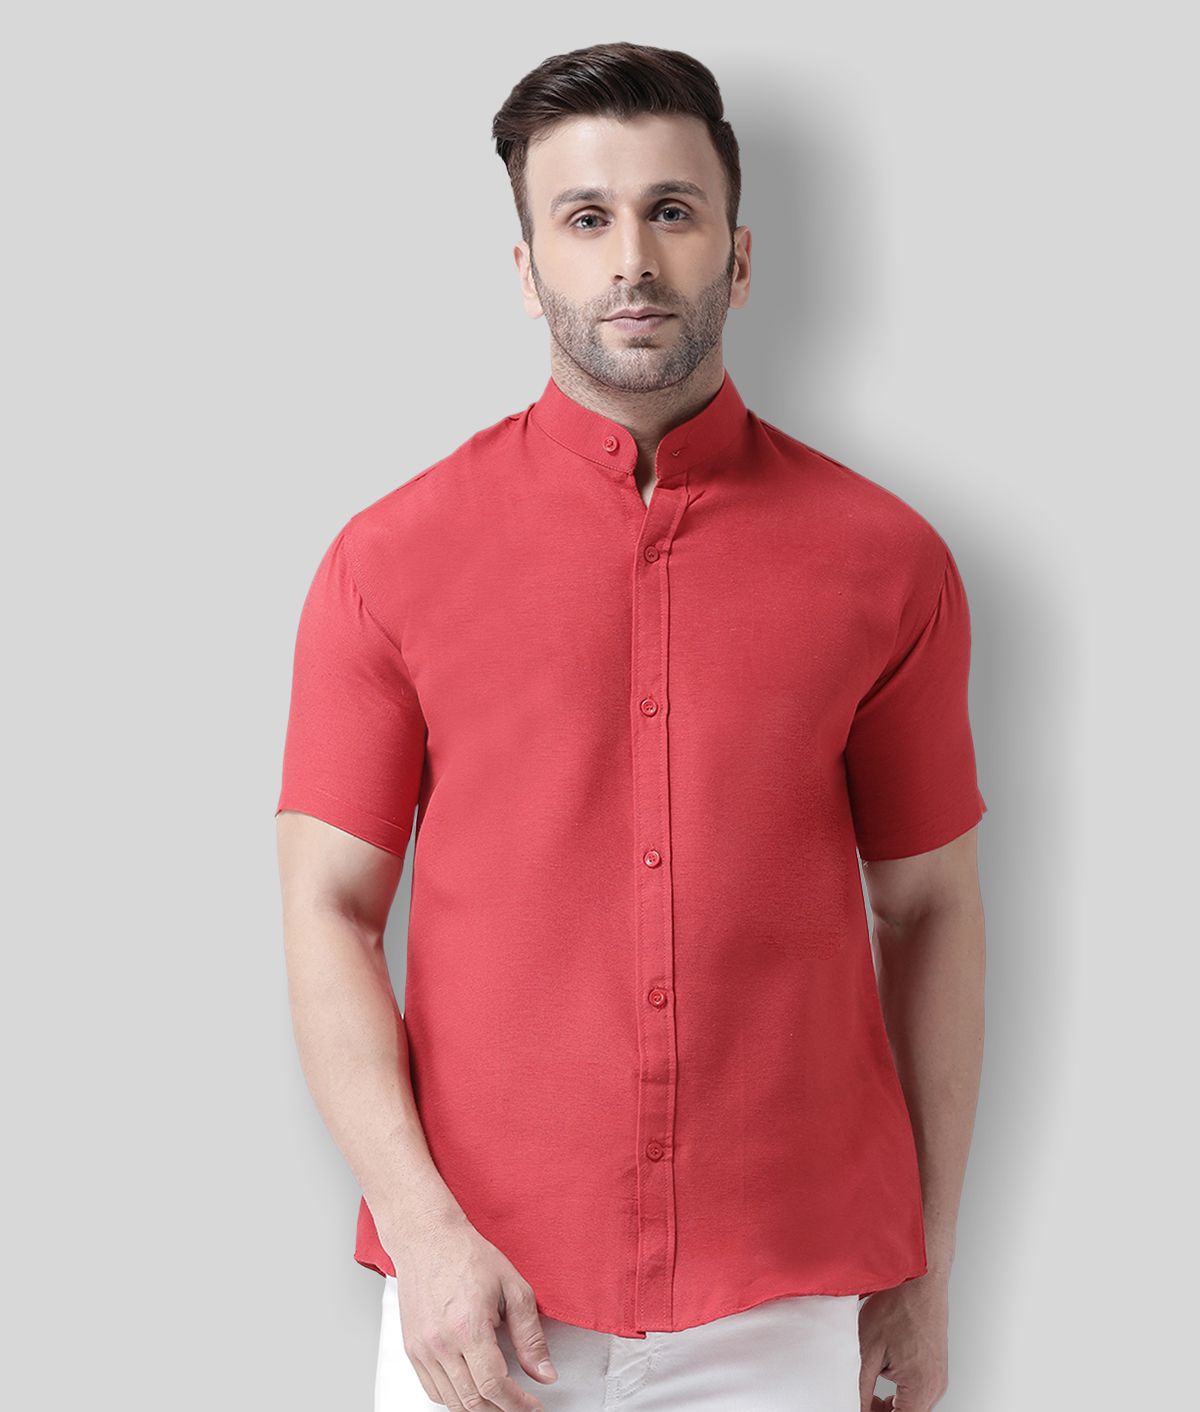     			RIAG - Red Cotton Regular Fit Men's Casual Shirt (Pack of 1 )